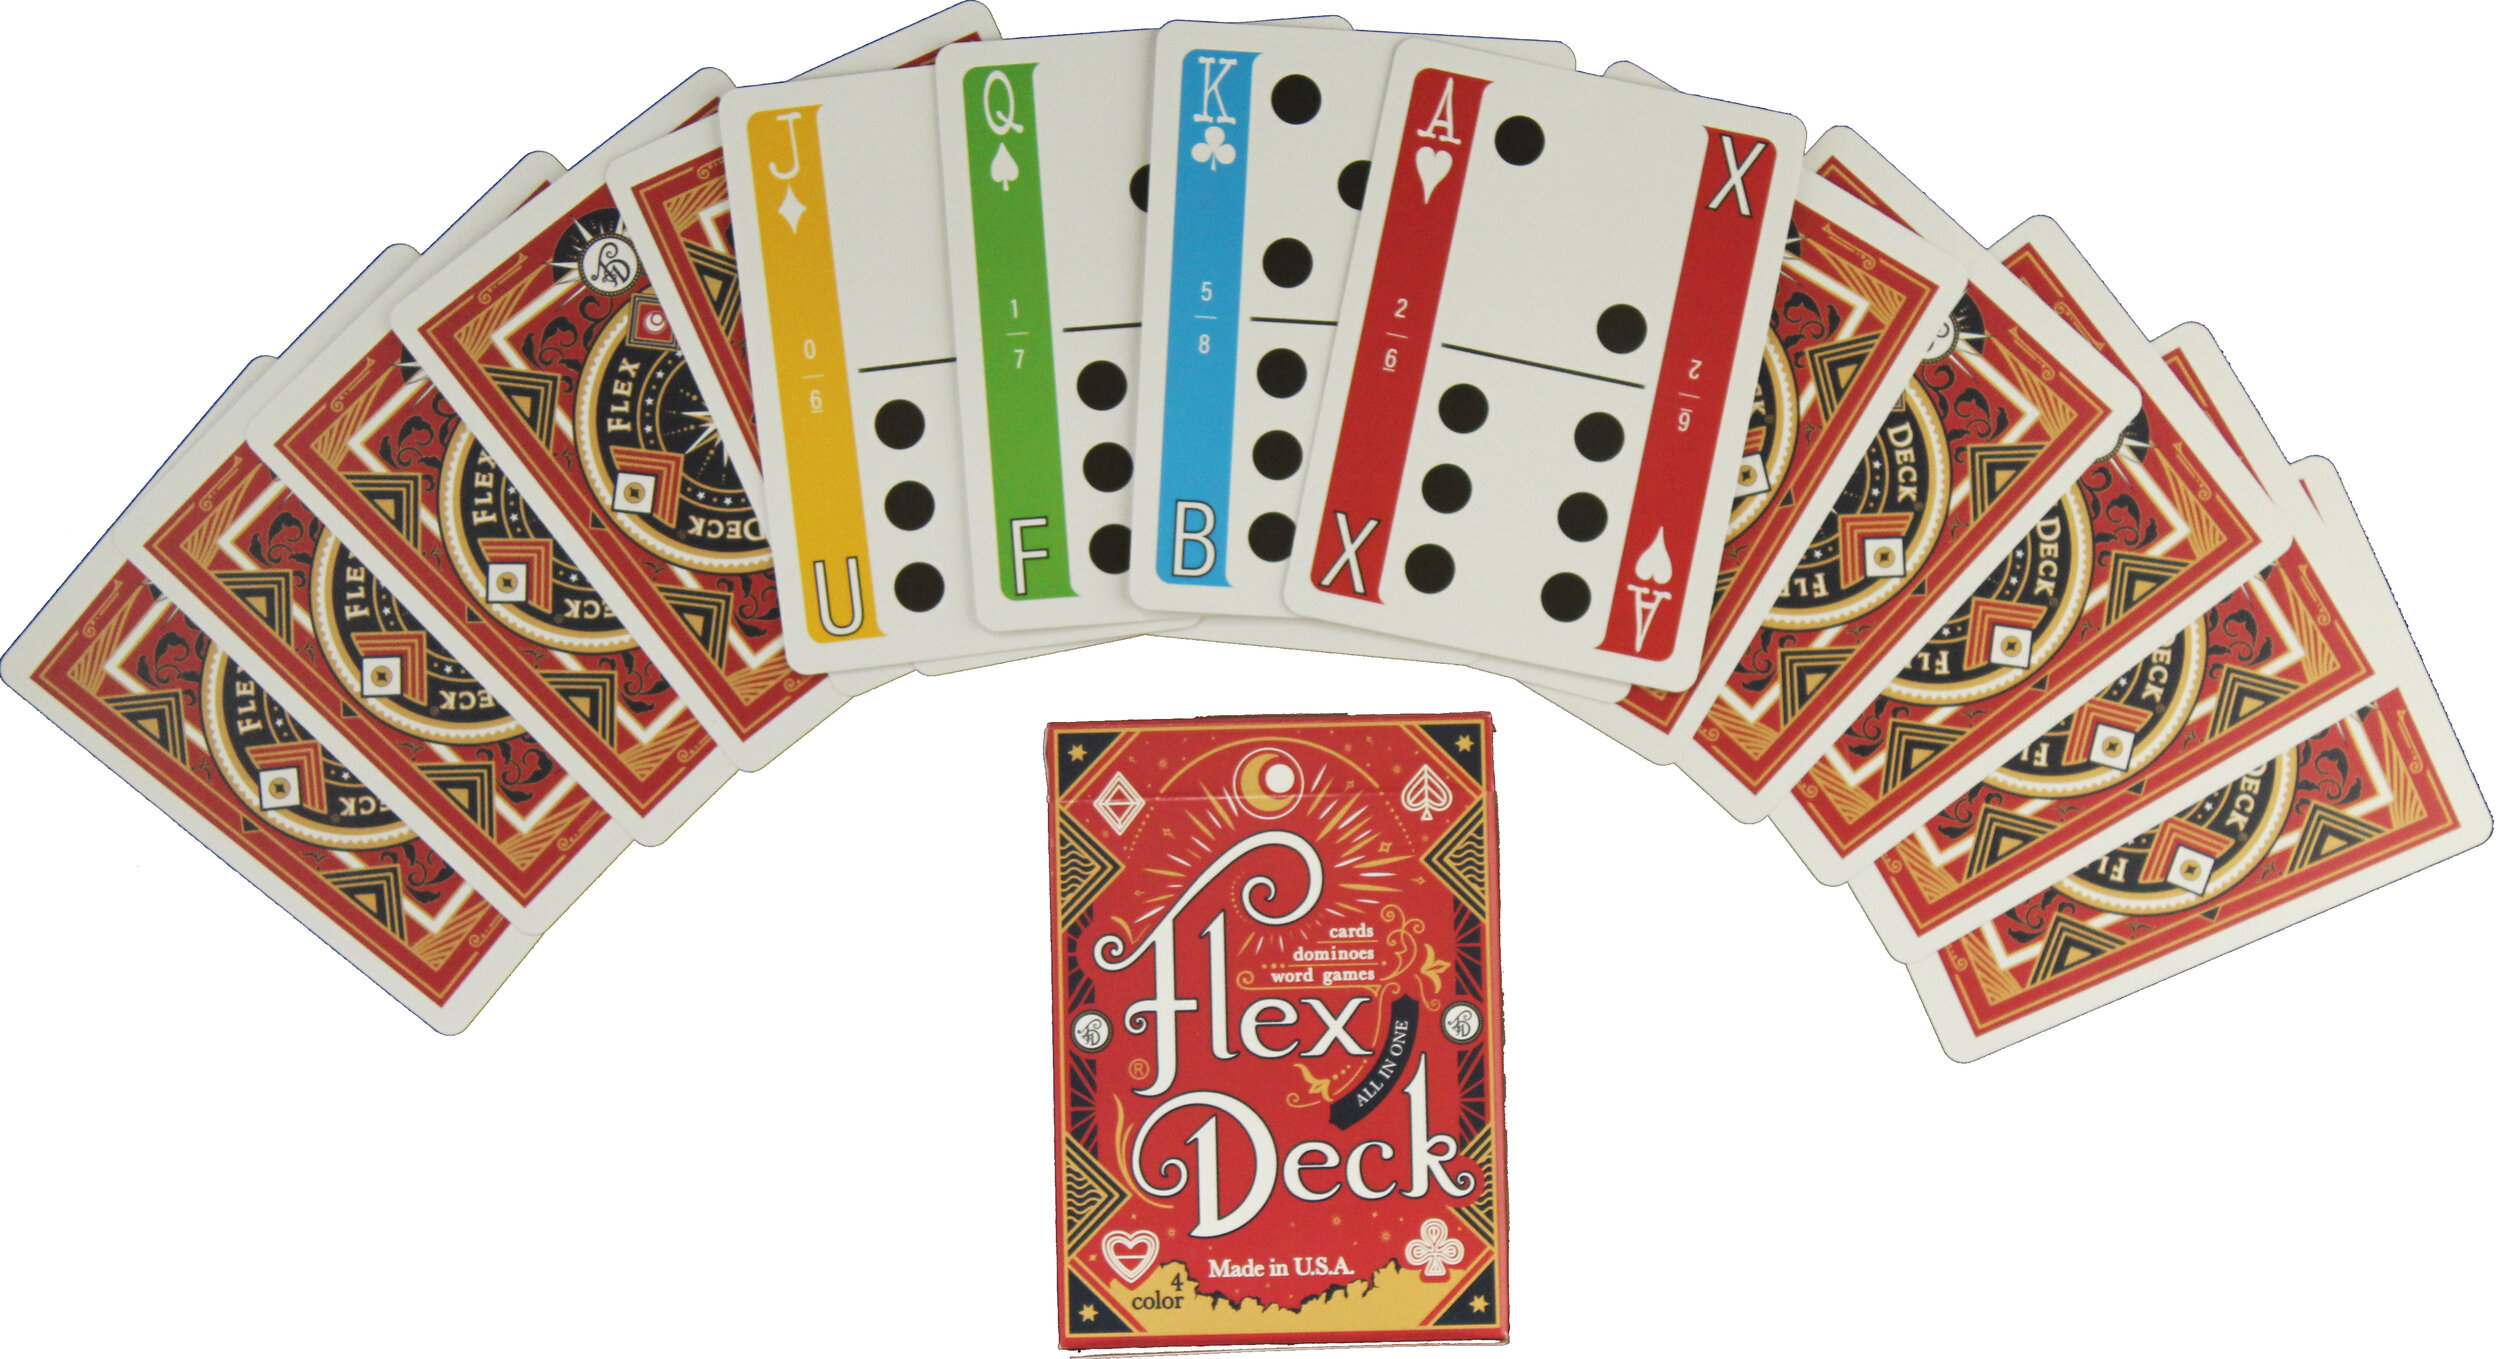 Flex Deck Playing Cards - 4 Color Back Design Spread with Court Cards and Tuck Box.jpg